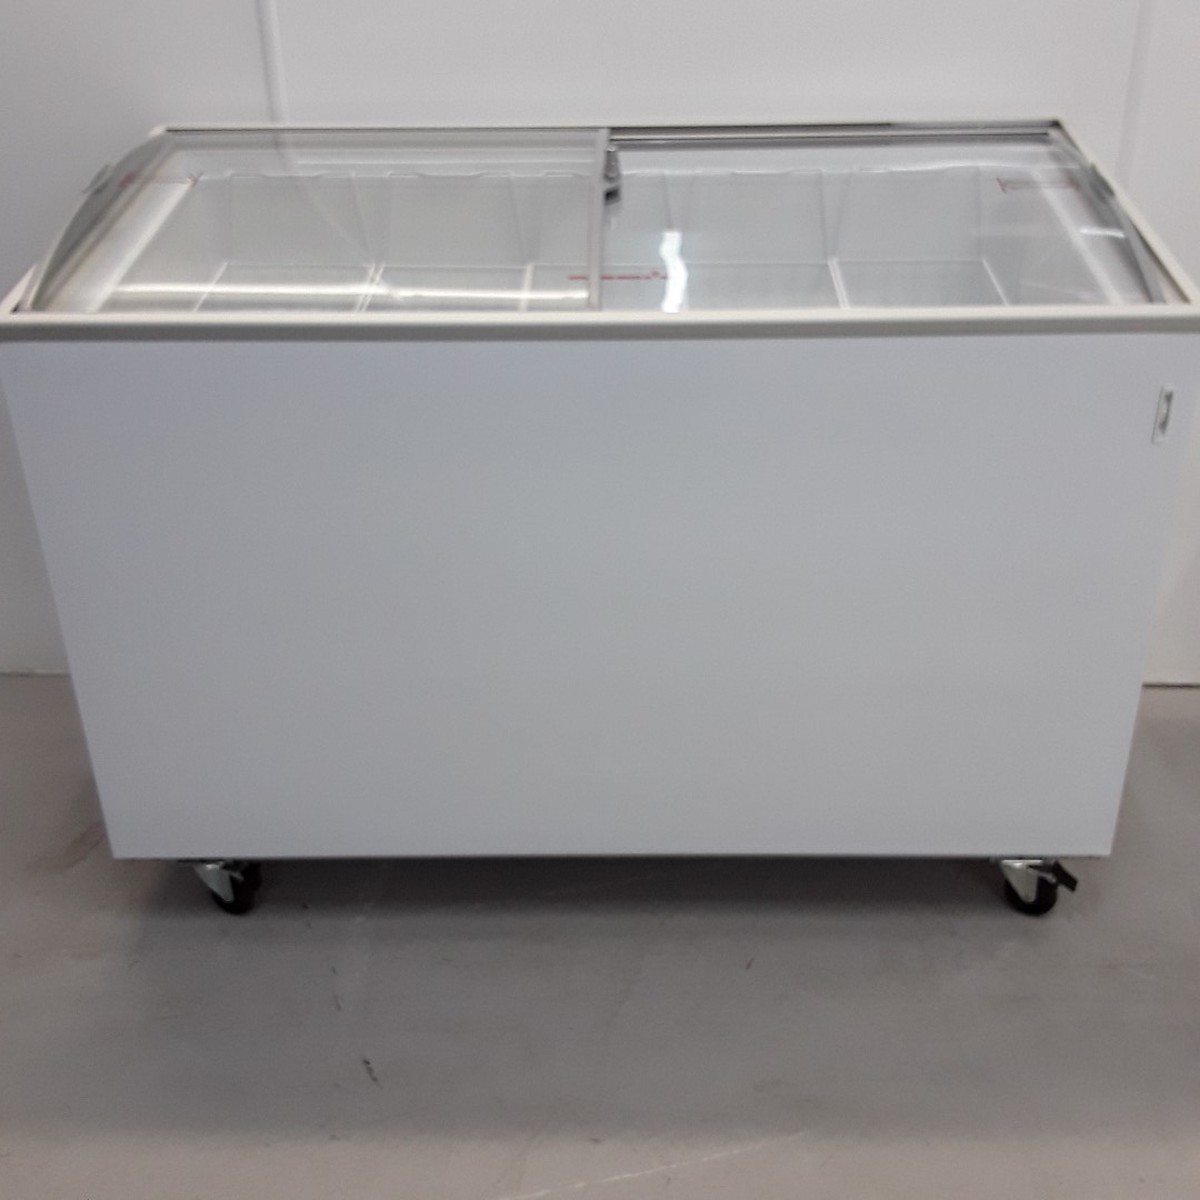 Secondhand Catering Equipment | H2 Products - Somerset | New B Grade ...